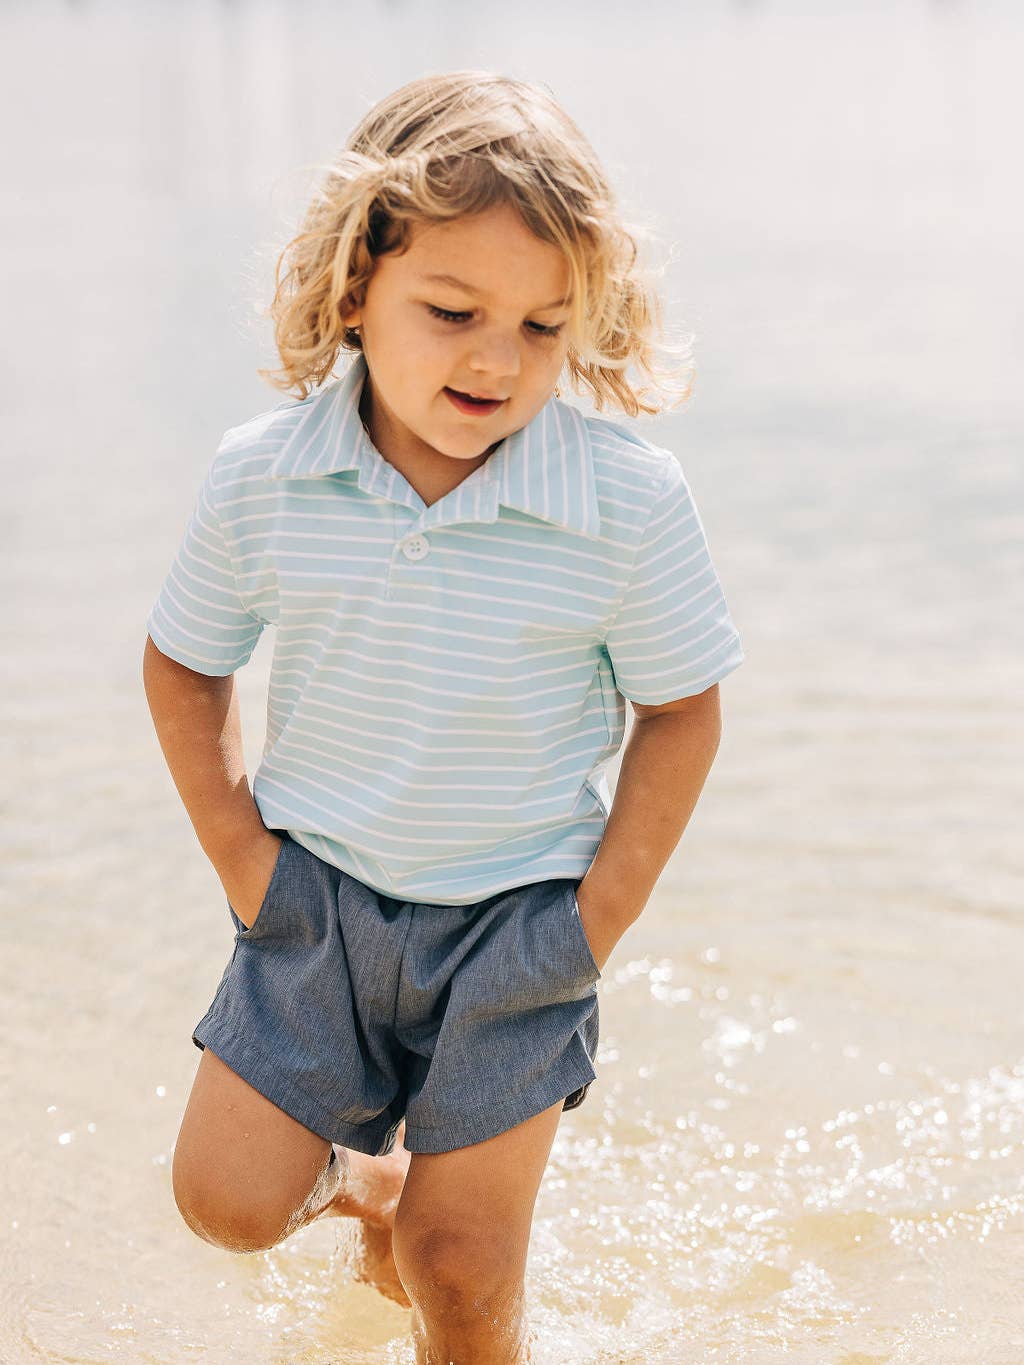 a little boy wearing a Sugar Bee Clothing Blue Stripe Polo Shirt standing in some water.